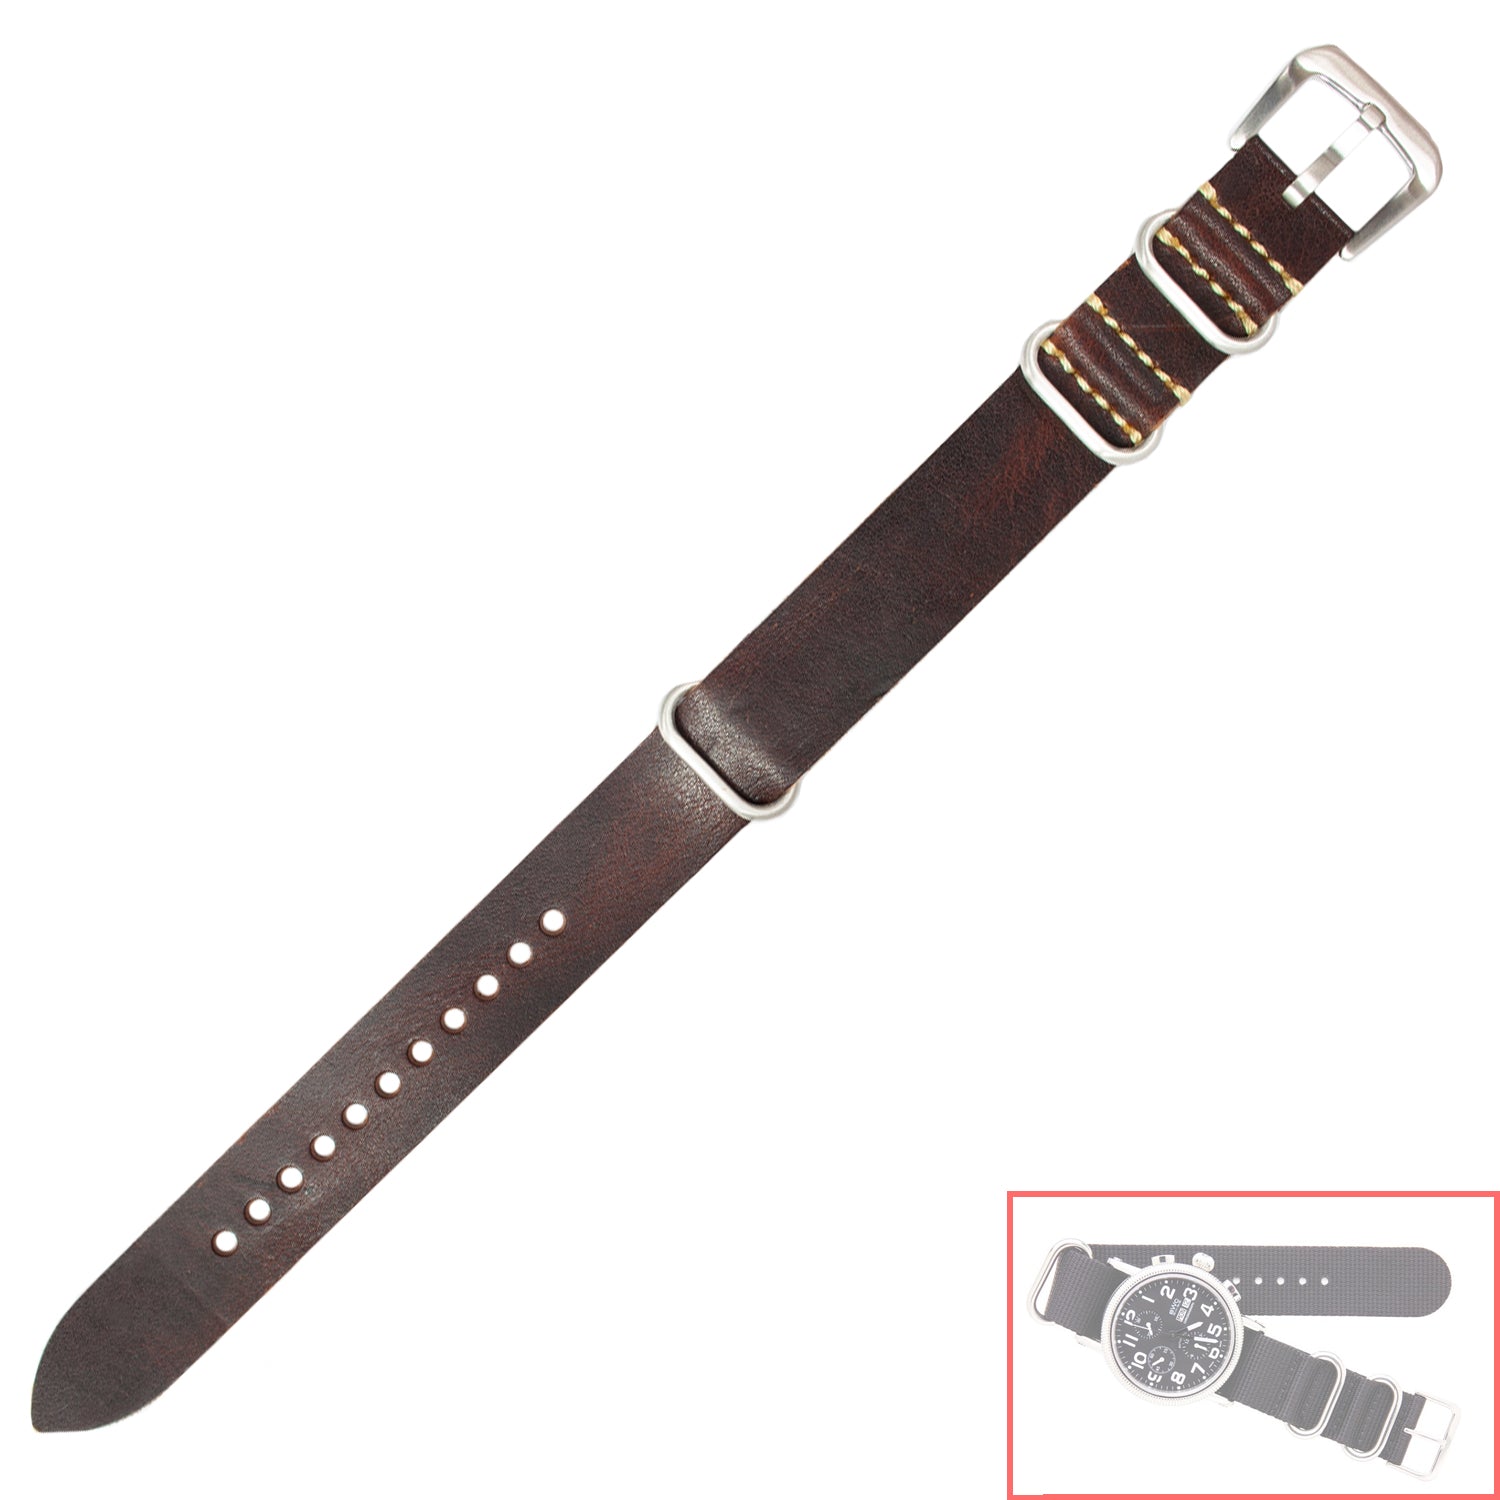 NSL No. 504 Genuine Leather Nato Style Straps with Steel Buckle (20 - 22mm)